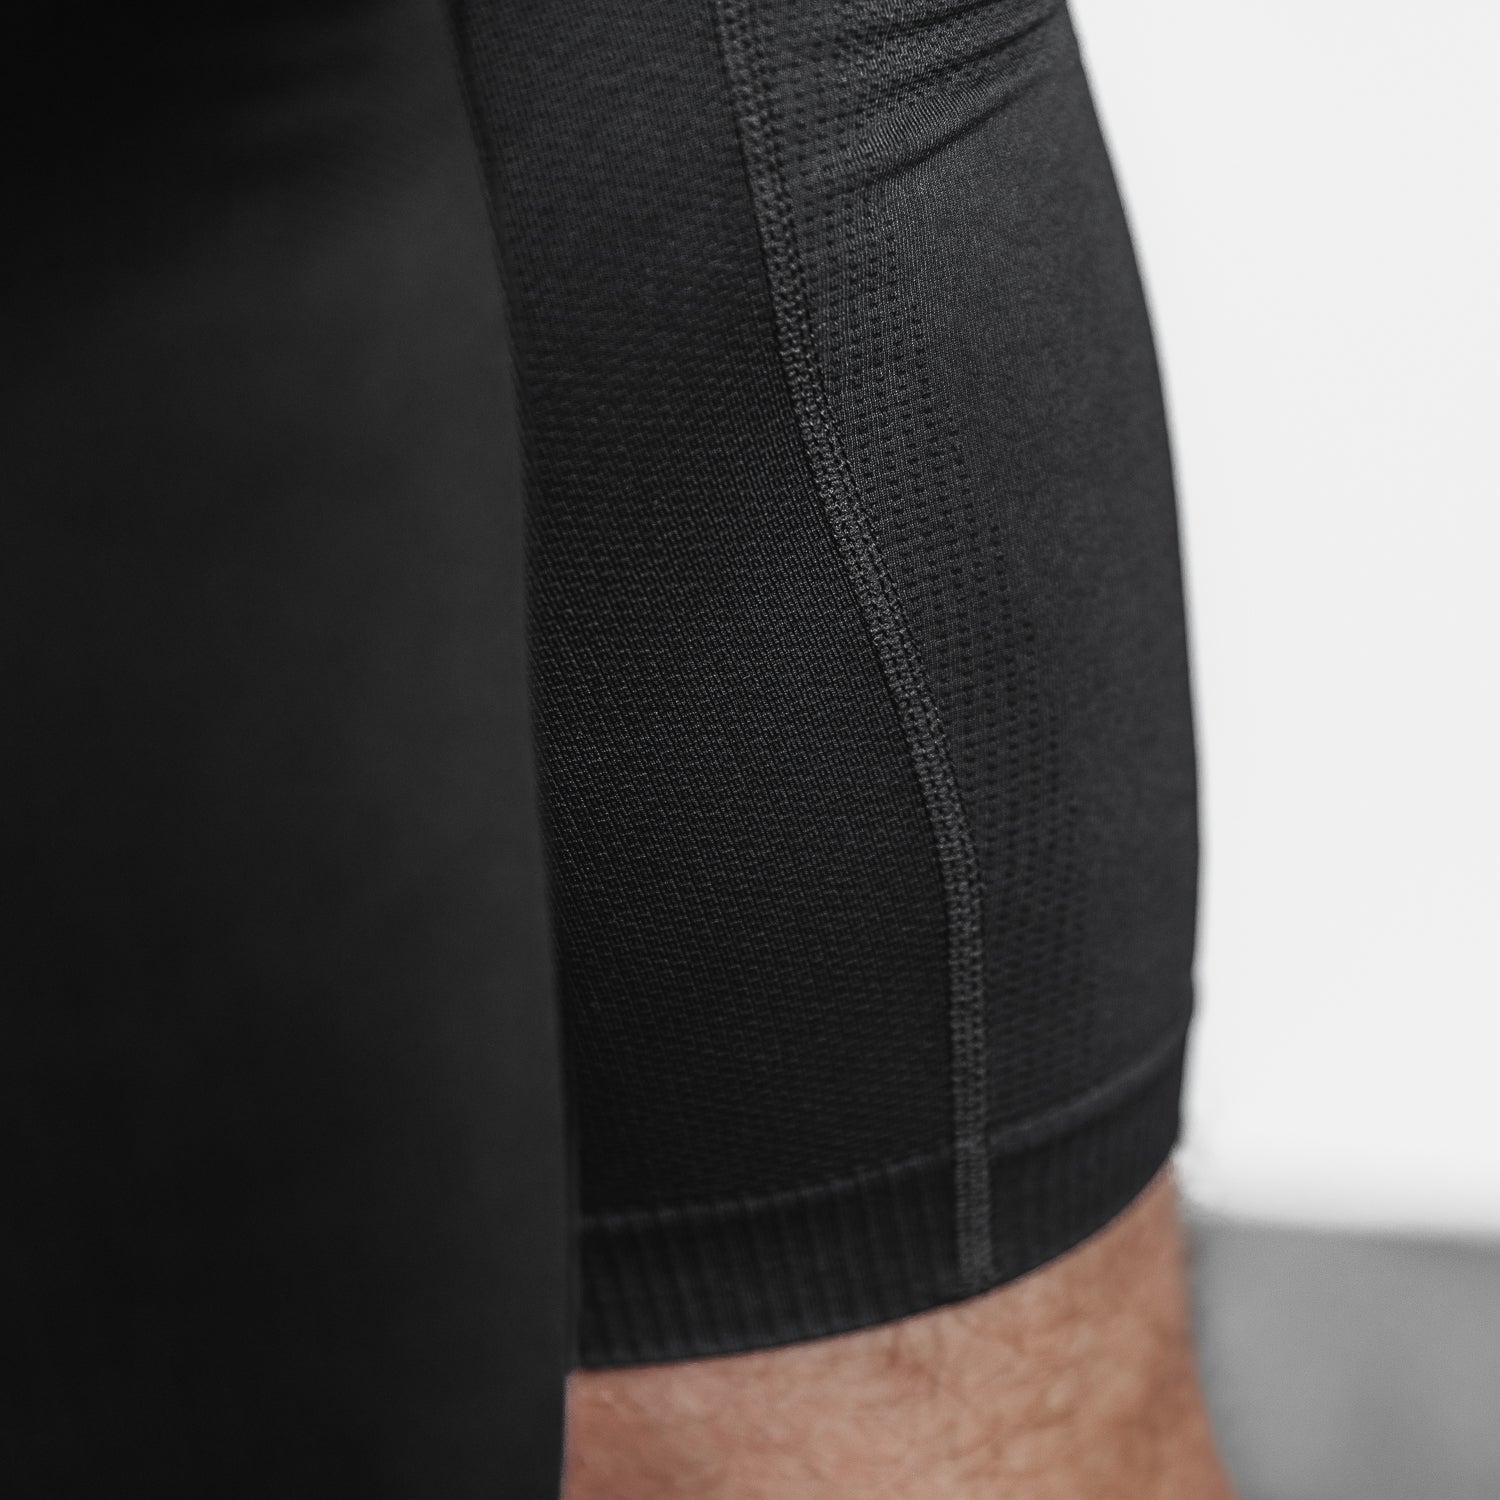 JOBST Confidence: Compression tights with no groin seam - Lipödem Mode  (bald: POWER SPROTTE - Der Blog)